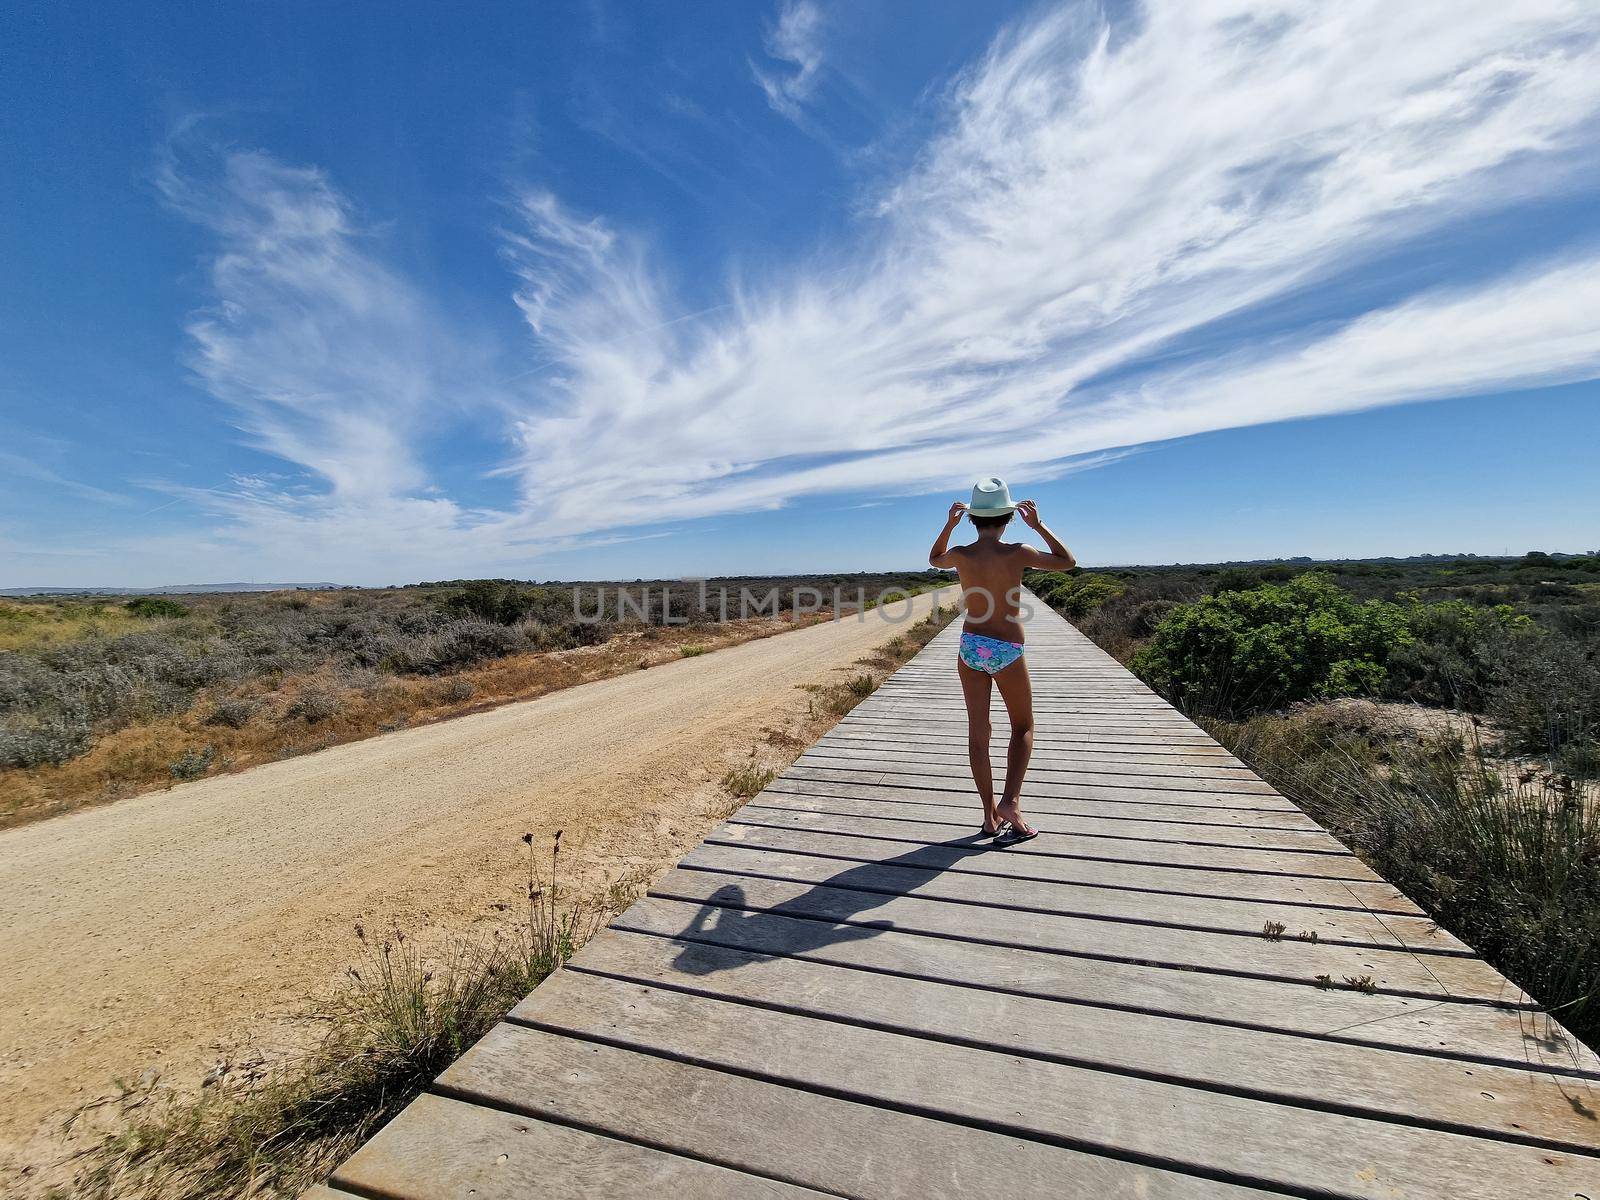 Girl on a path of wooden planks on the sand near Valdelagrana beach, with beautiful clouds in the sky. Puerto de Santa Maria, Cadiz, Andalusia, Spain.